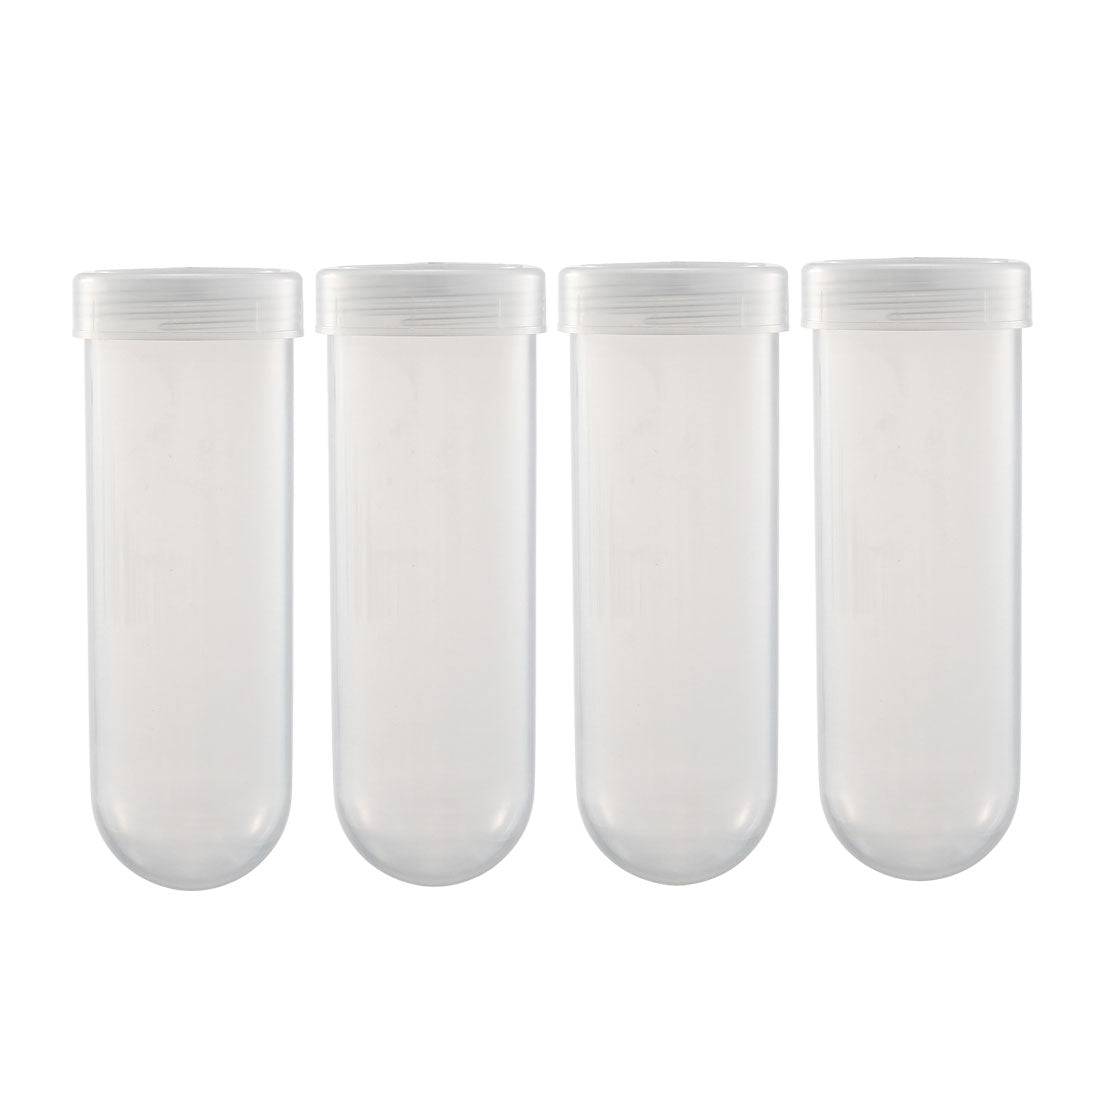 uxcell Uxcell 10 Pcs 100ml Plastic Centrifuge Tubes with Screw Cap, Round Bottom